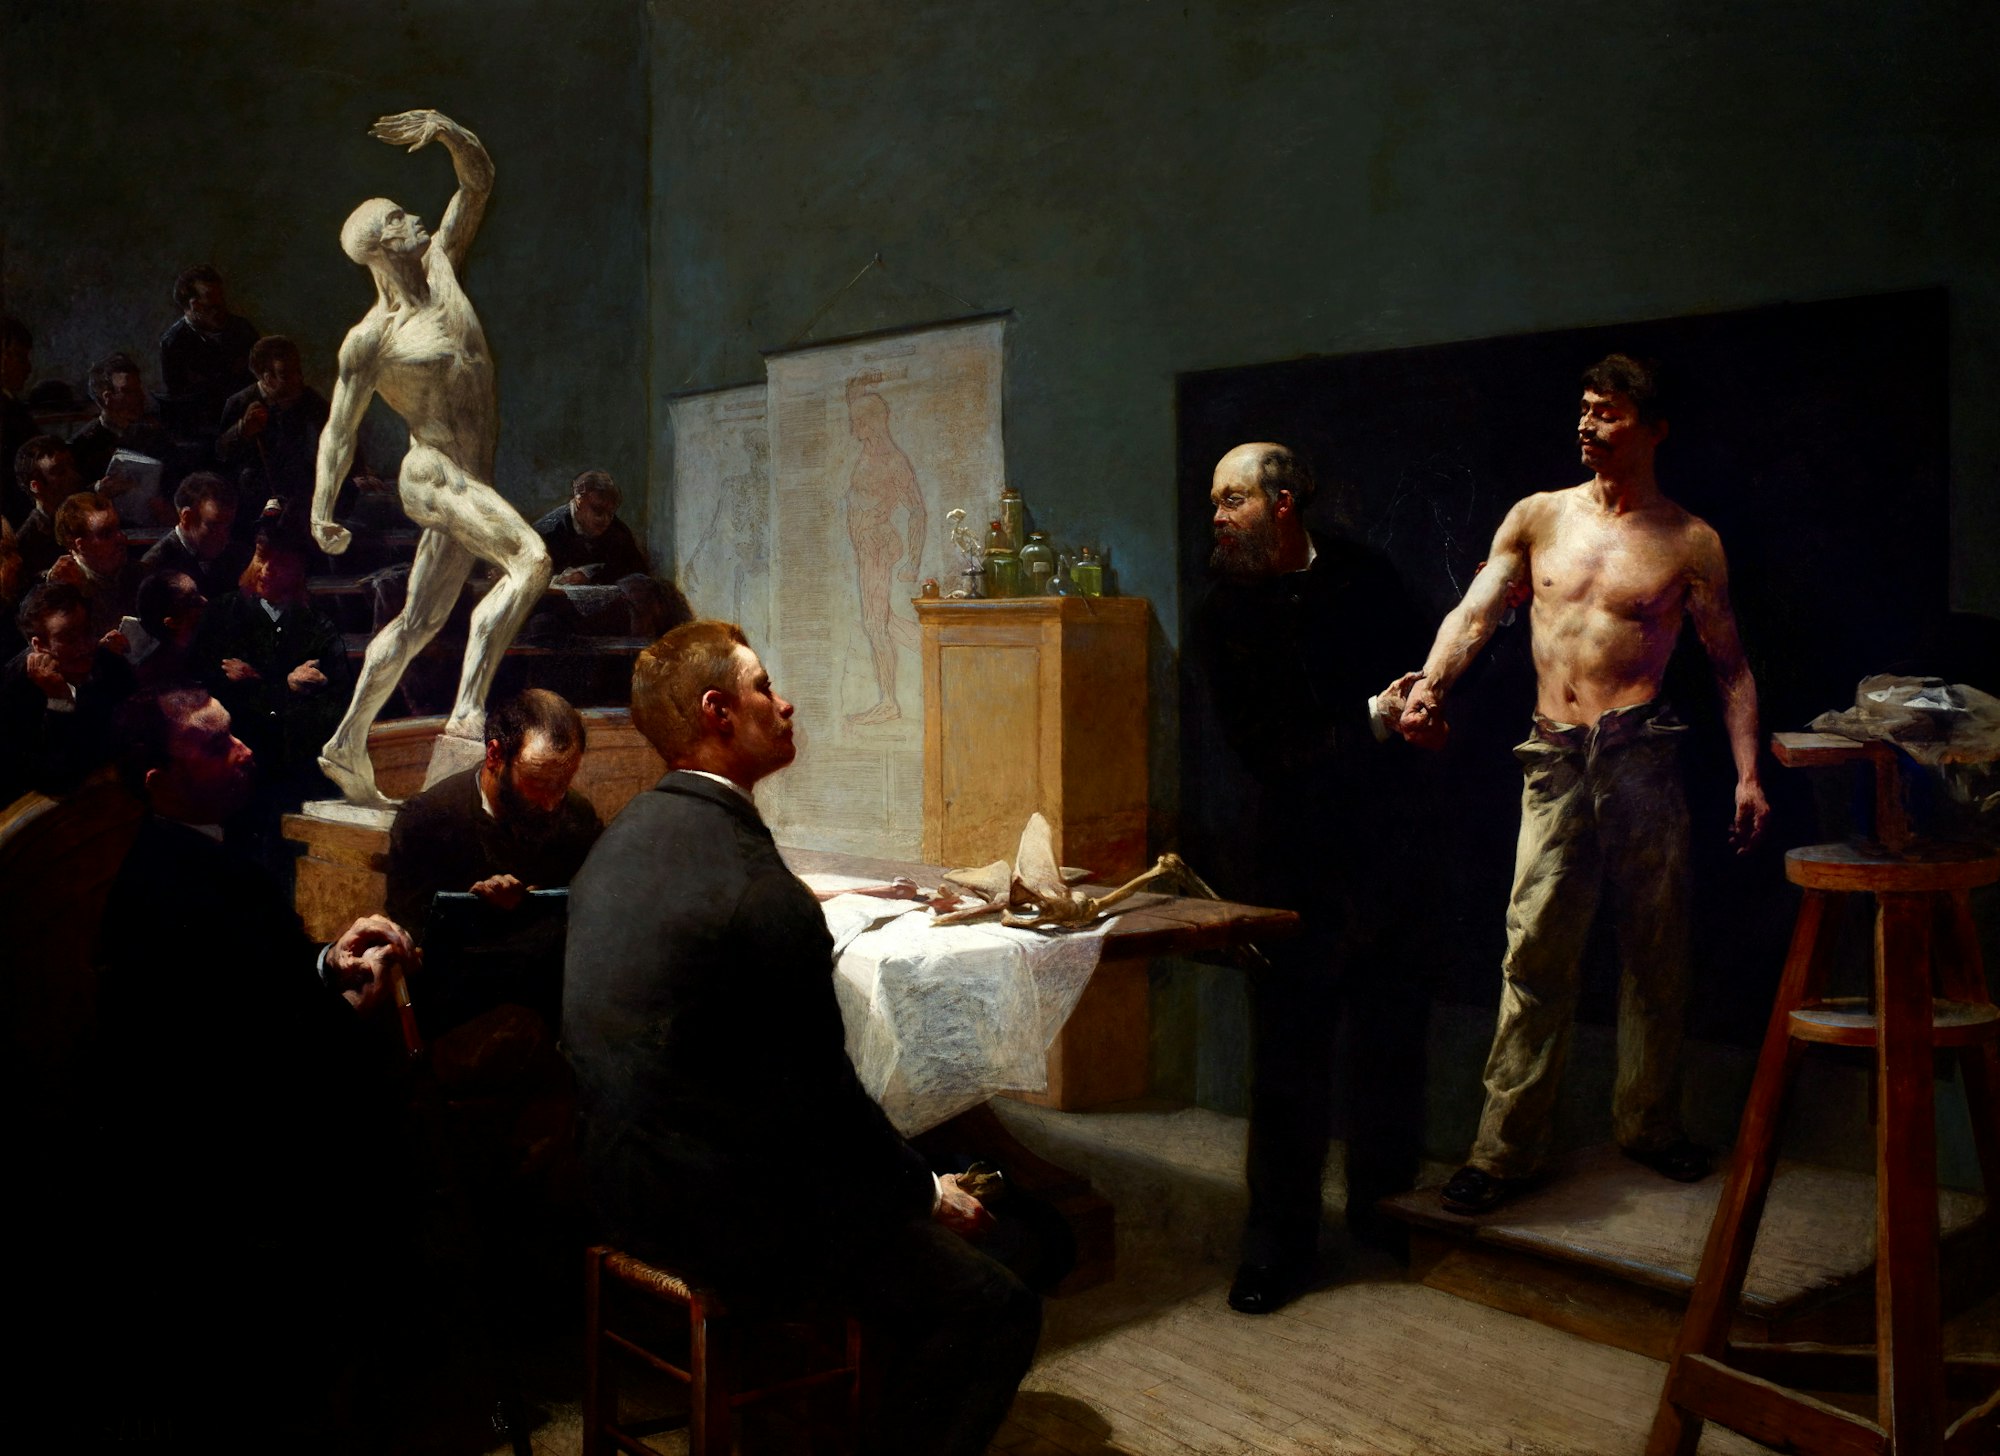 A scene at an anatomy class: the model with a bared torso has their hand held by the teacher. Adult students sit and look at the model.